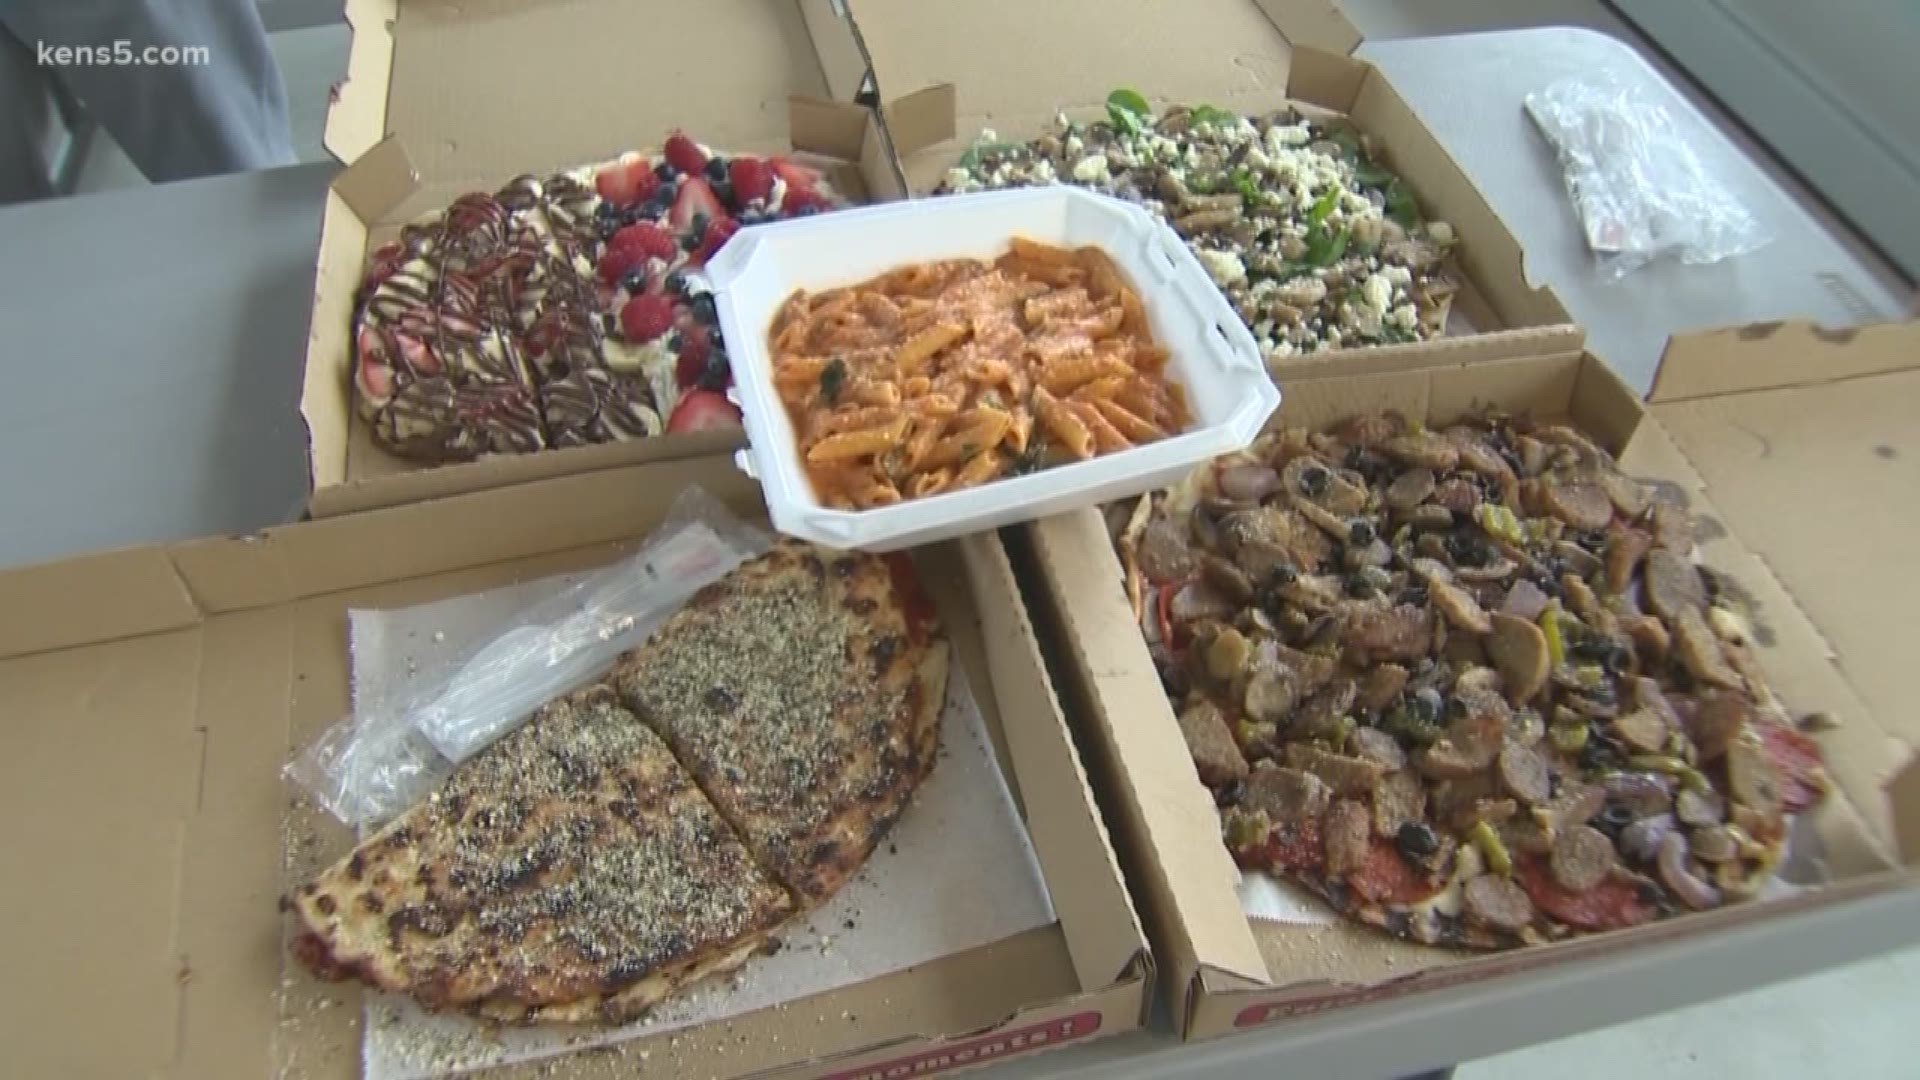 Pizza and pasta have Neighborhood Eats throwing a food truck fit this morning. Marvin Hurst says the pizza has a unique flavor because it's grilled.